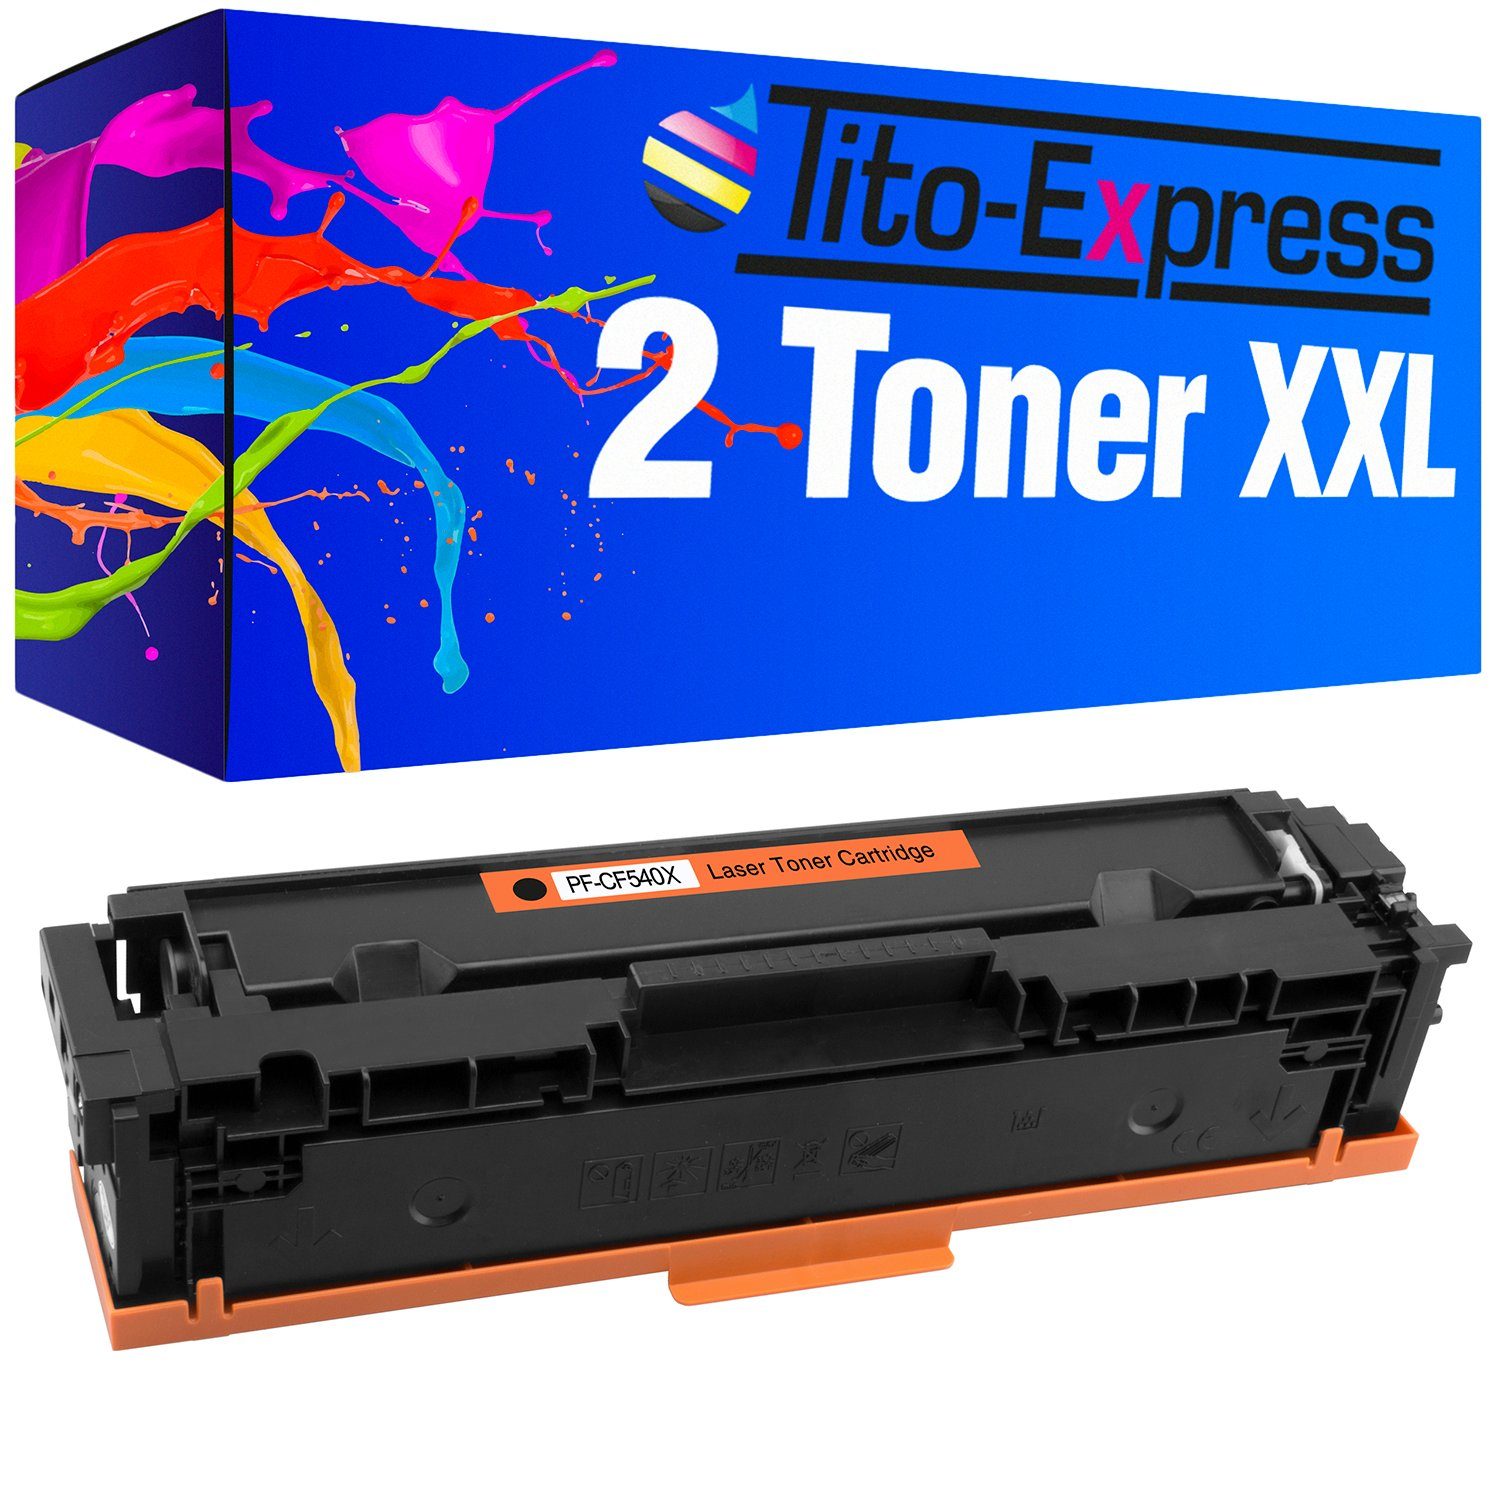 X für CF M281fdw Laserjet Pro M281fdn M254dn M254nw Color CF M254dw 540X HP M280nw 540 CF540X Black), 203X, MFP Set 2x ersetzt Tito-Express (Doppelpack, 2er Tonerpatrone